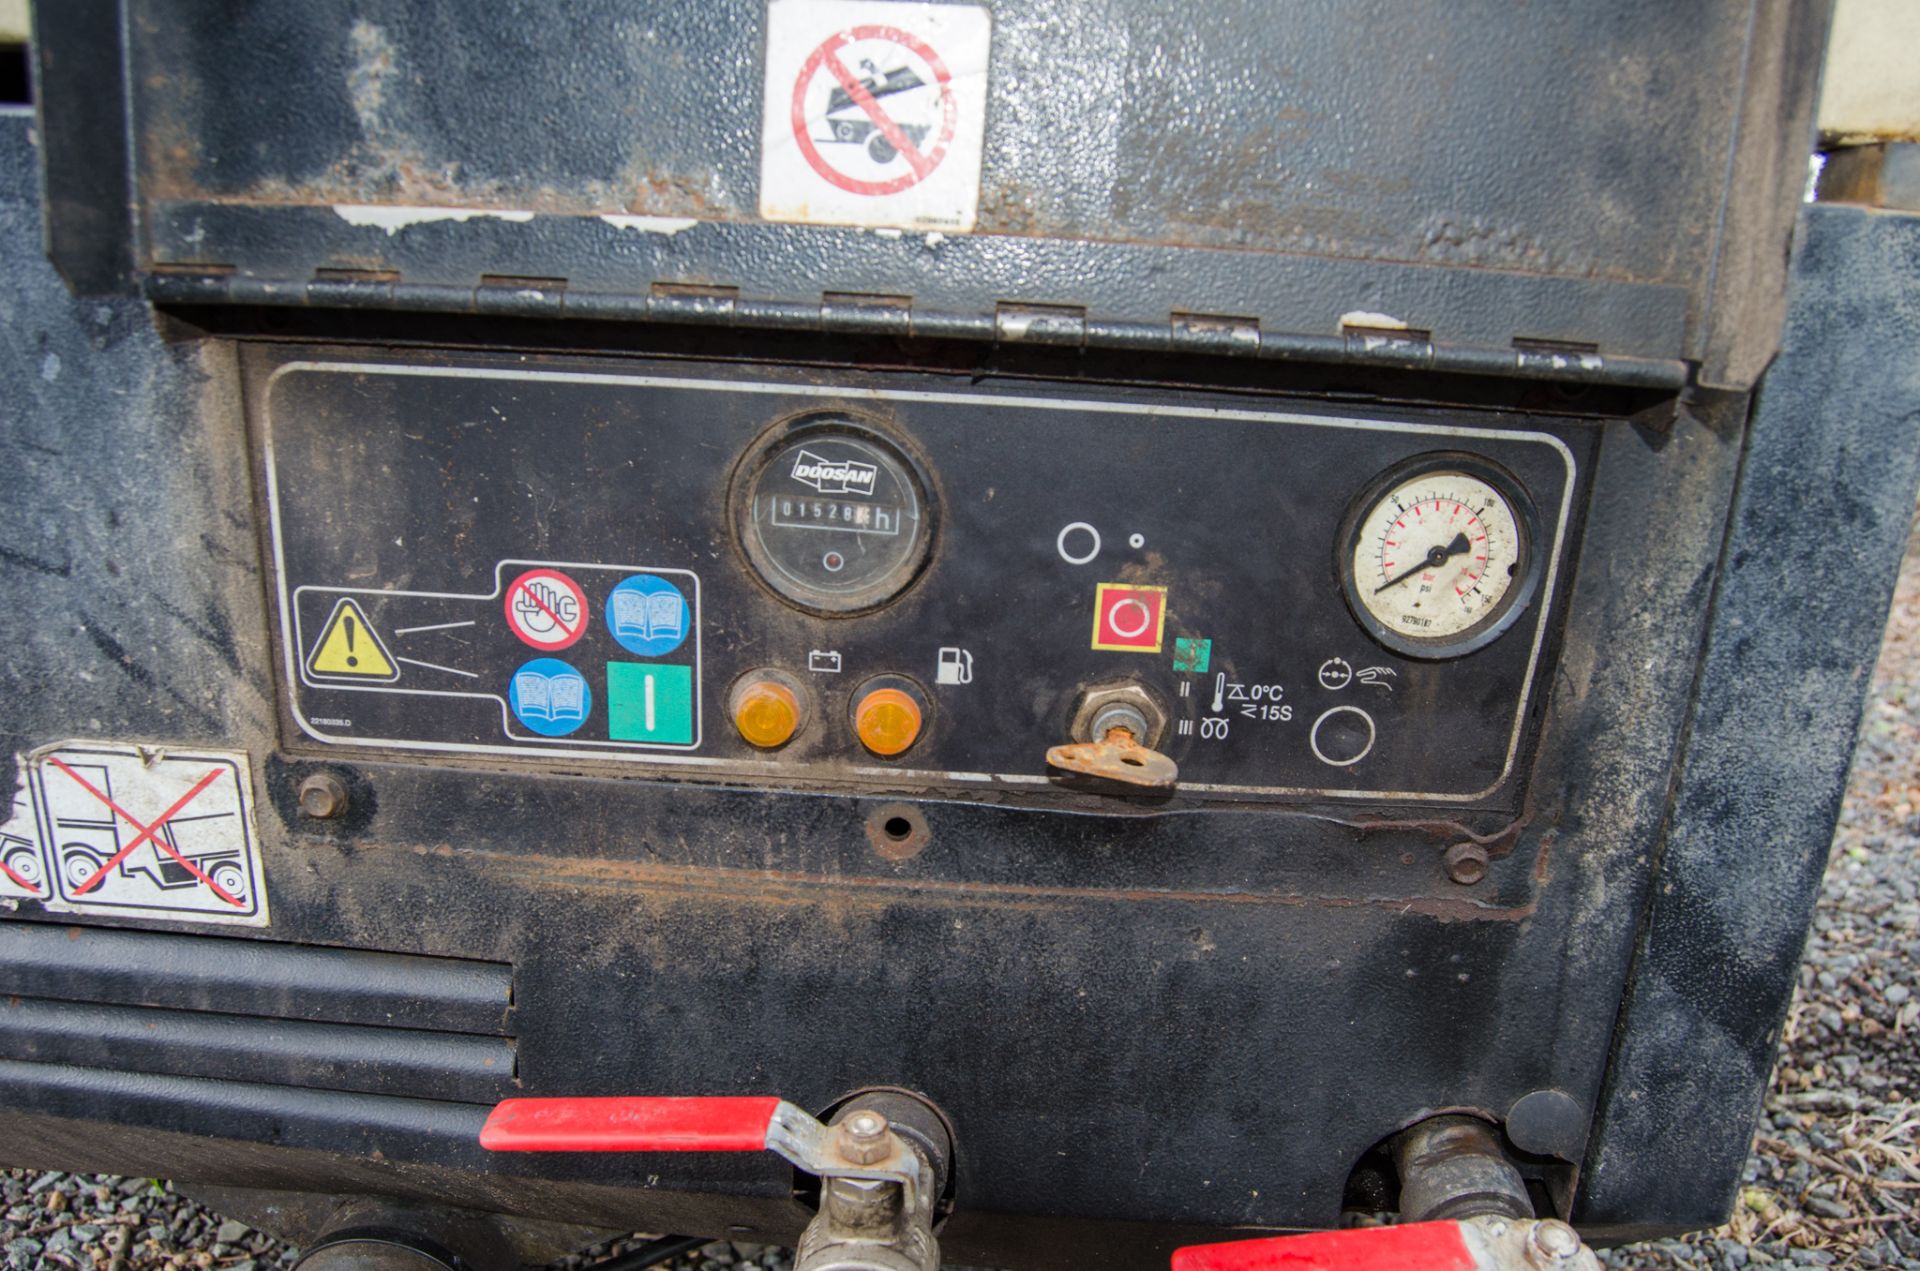 Doosan 7/41 diesel driven fast tow air compressor Year: 2015 S/N: 053202 Recorded hours: 1528 - Image 7 of 7